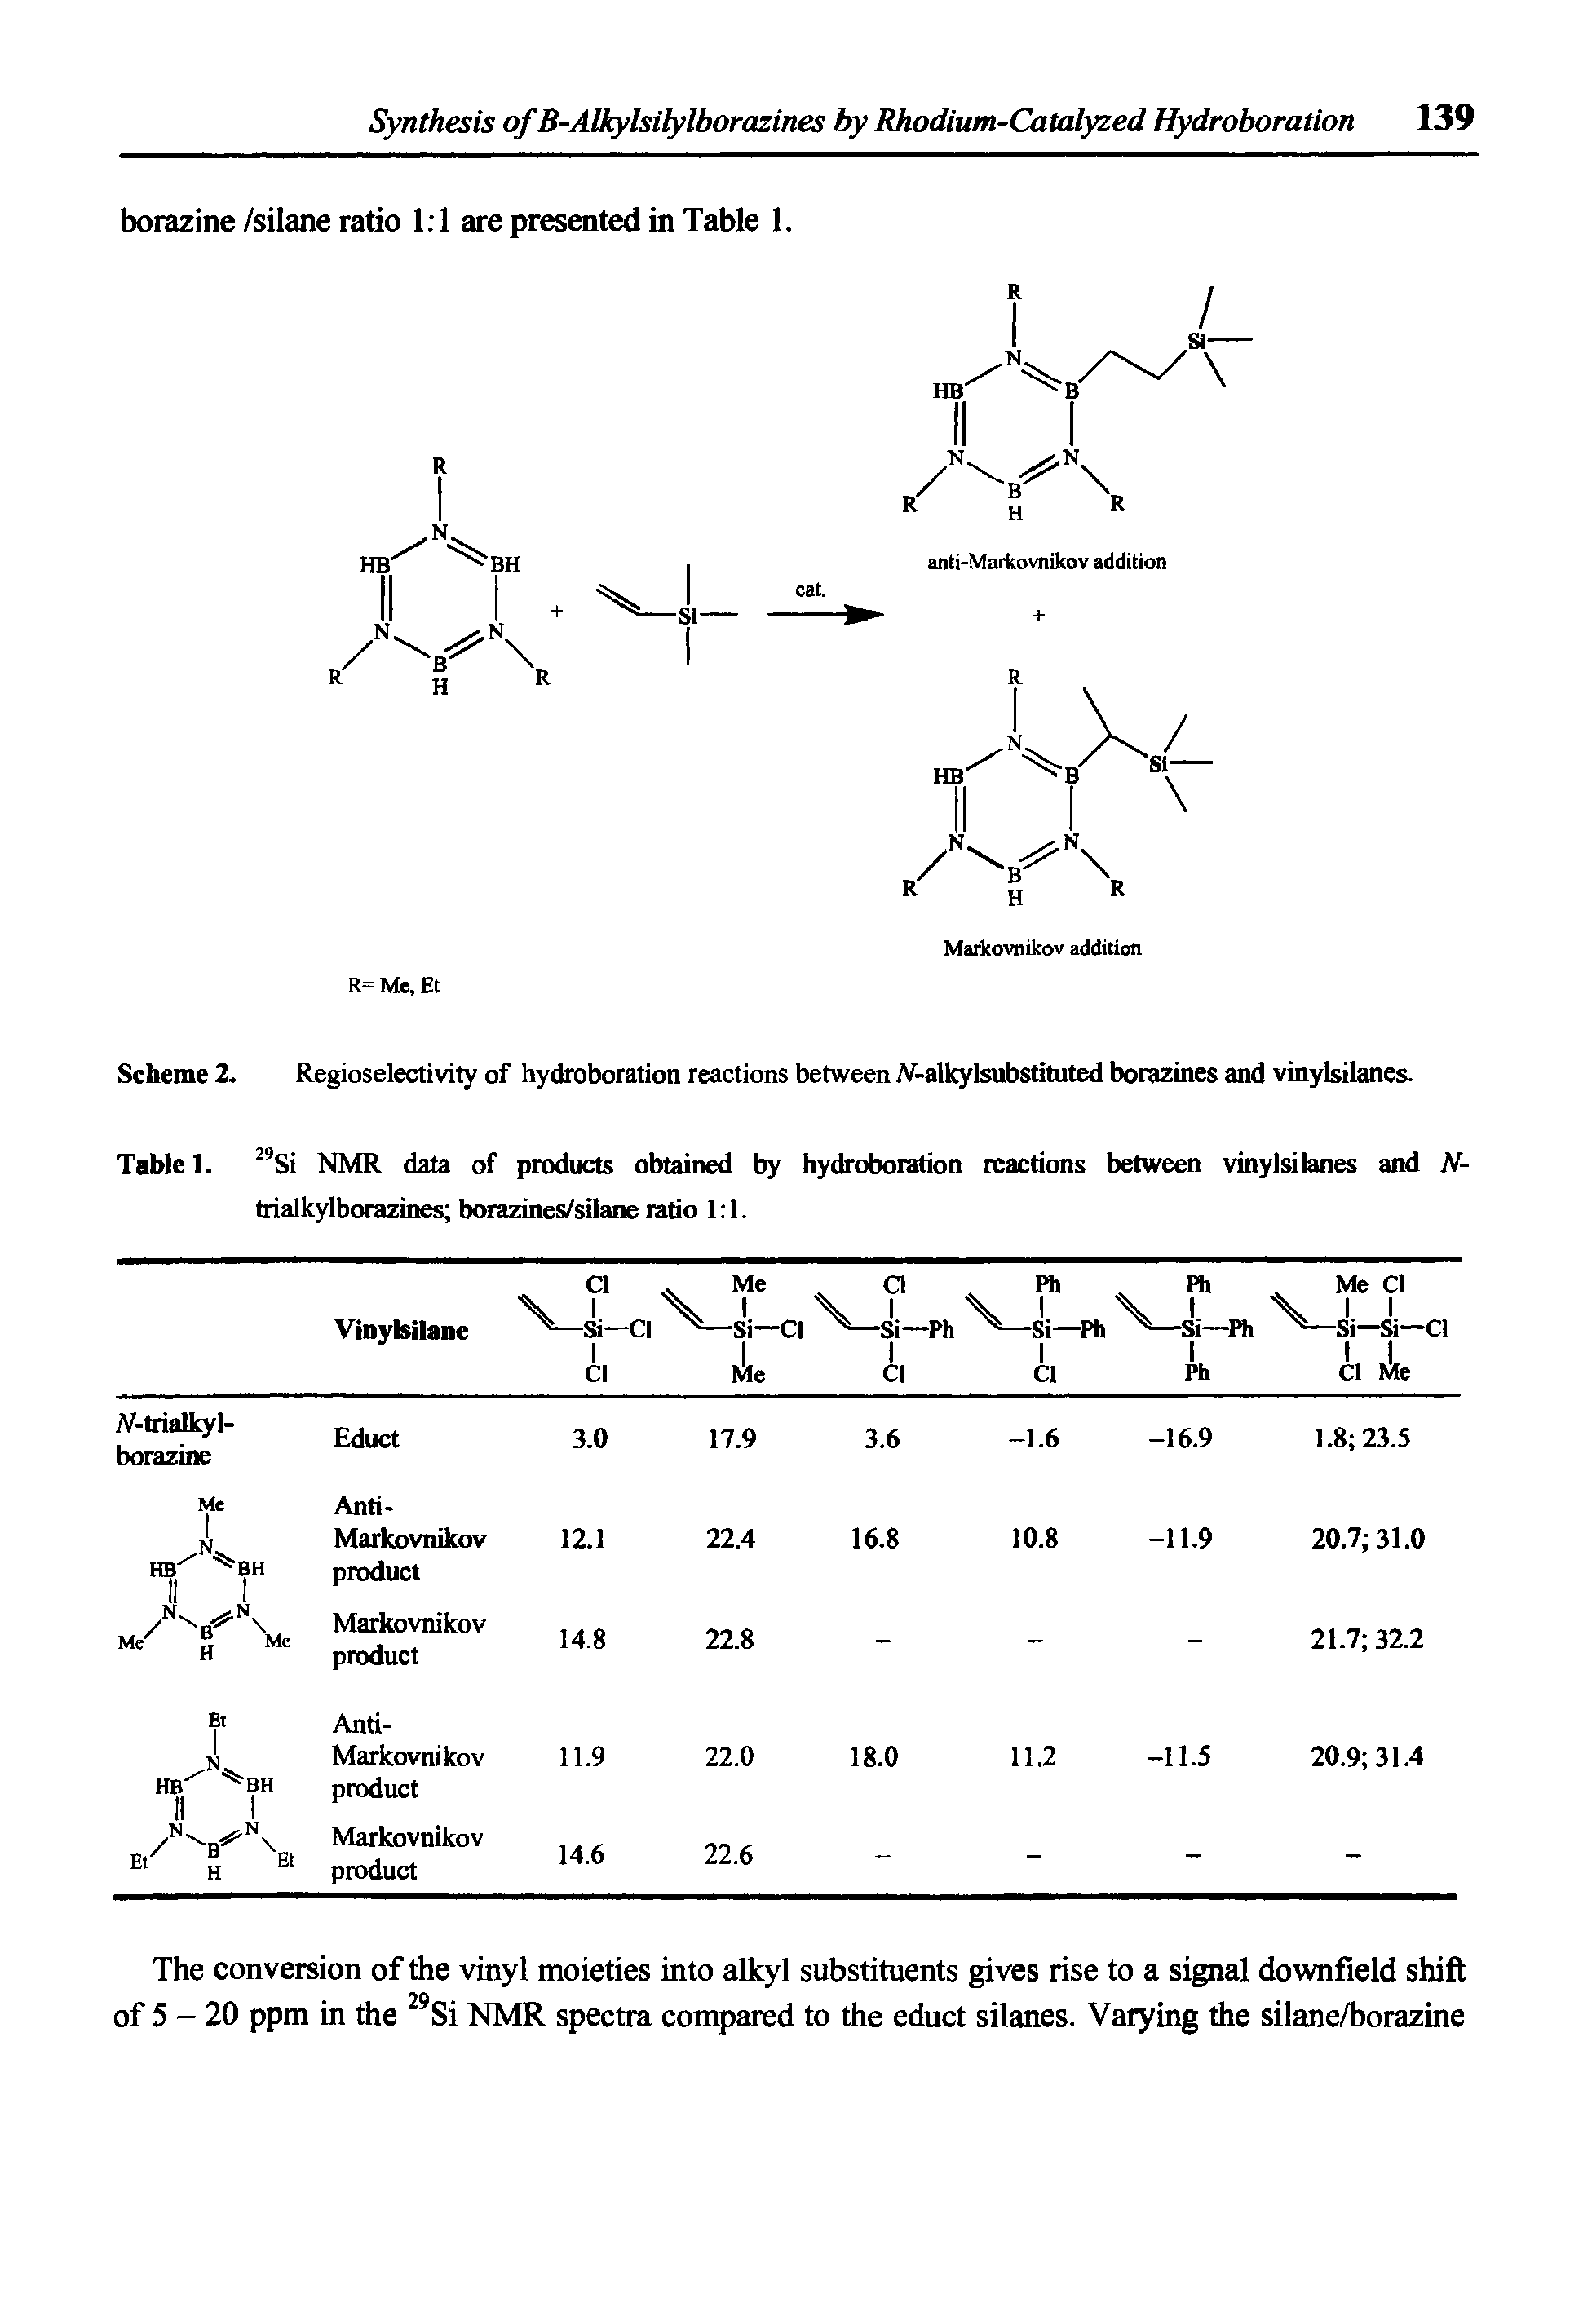 Scheme 2. Regioselectivity of hydroboration reactions between AT-alkylsubstituted borazines and vinylsilanes.